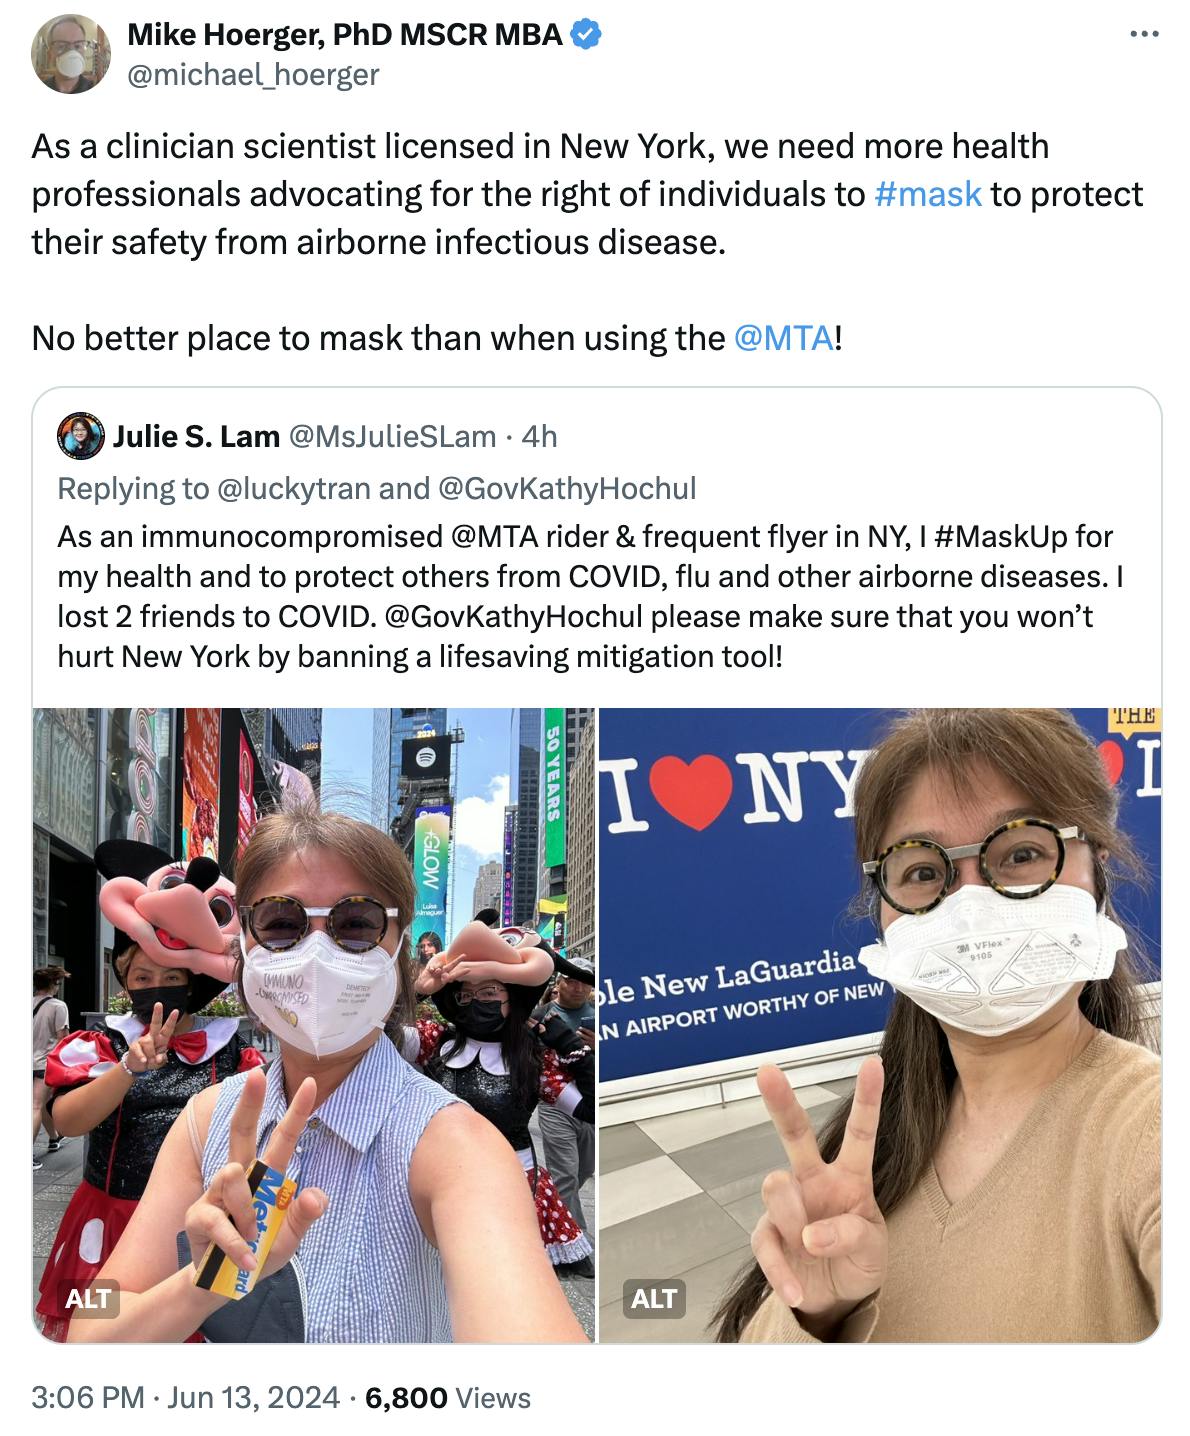 Tweet screenshot Mike Hoerger, PhD MSCR MBA: As a clinician scientist licensed in New York, we need more health professionals advocating for the right of individuals to #mask to protect their safety from airborne infectious disease. No better place to mask than when using the @MTA !